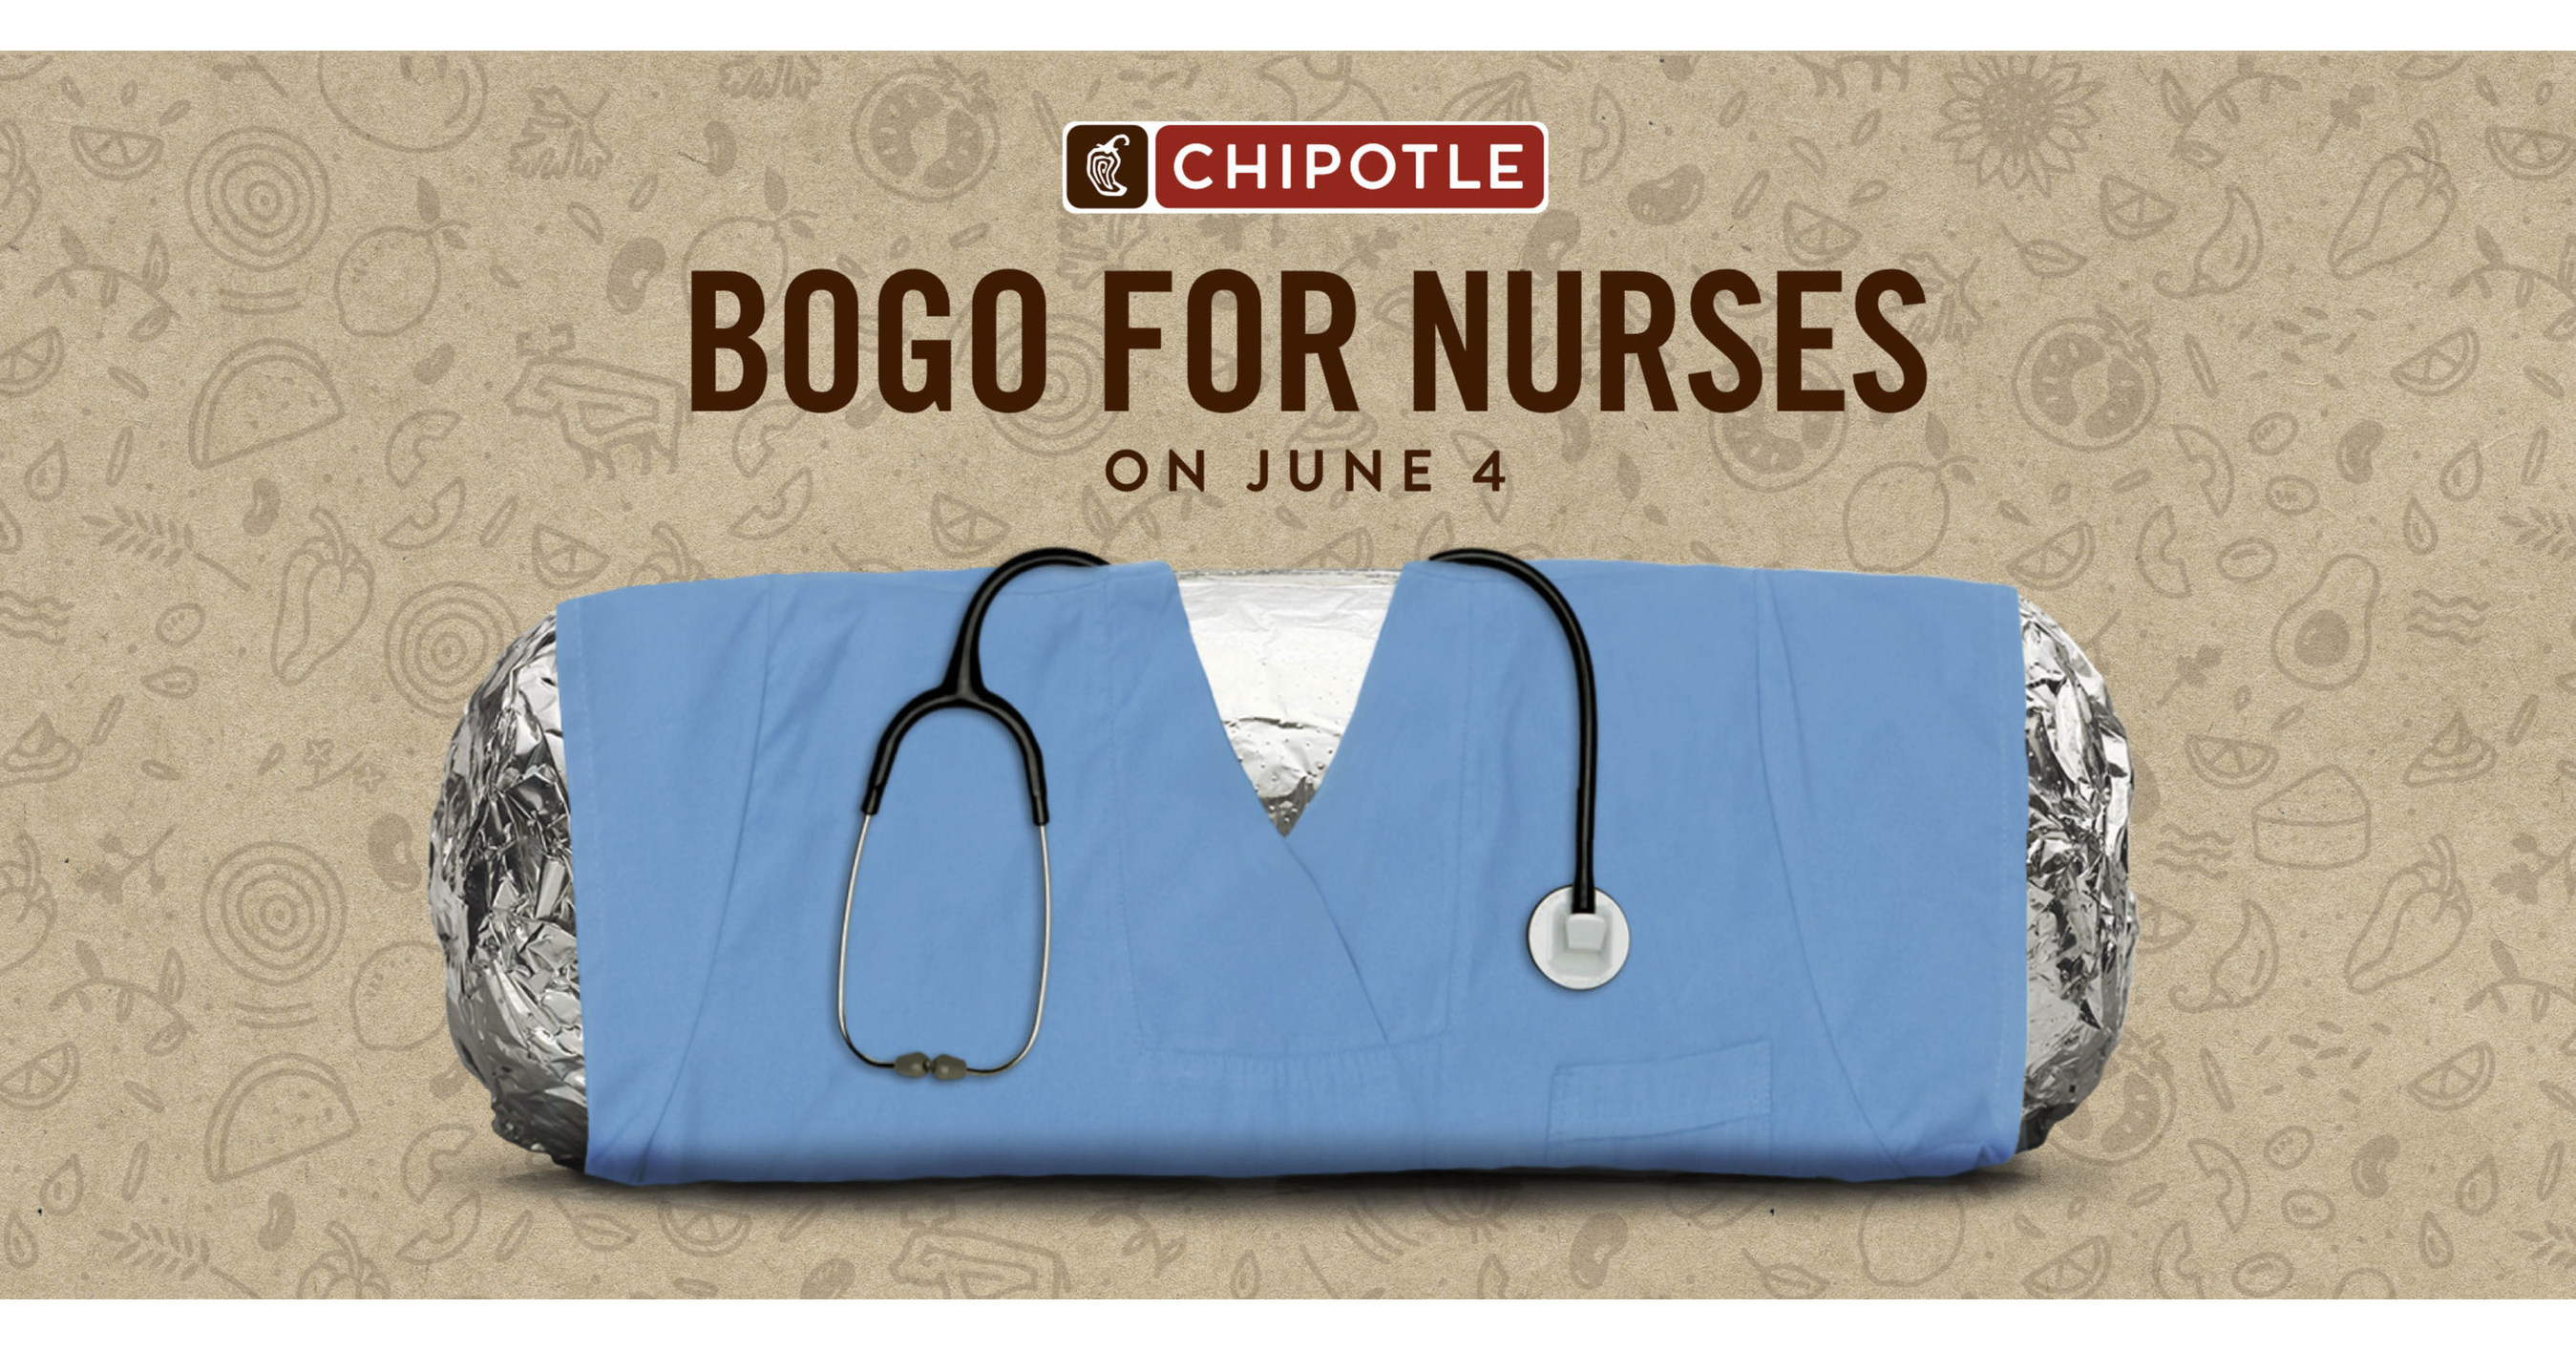 Free Burritos Chipotle Honors Nurses with OneDay BOGO On June 4